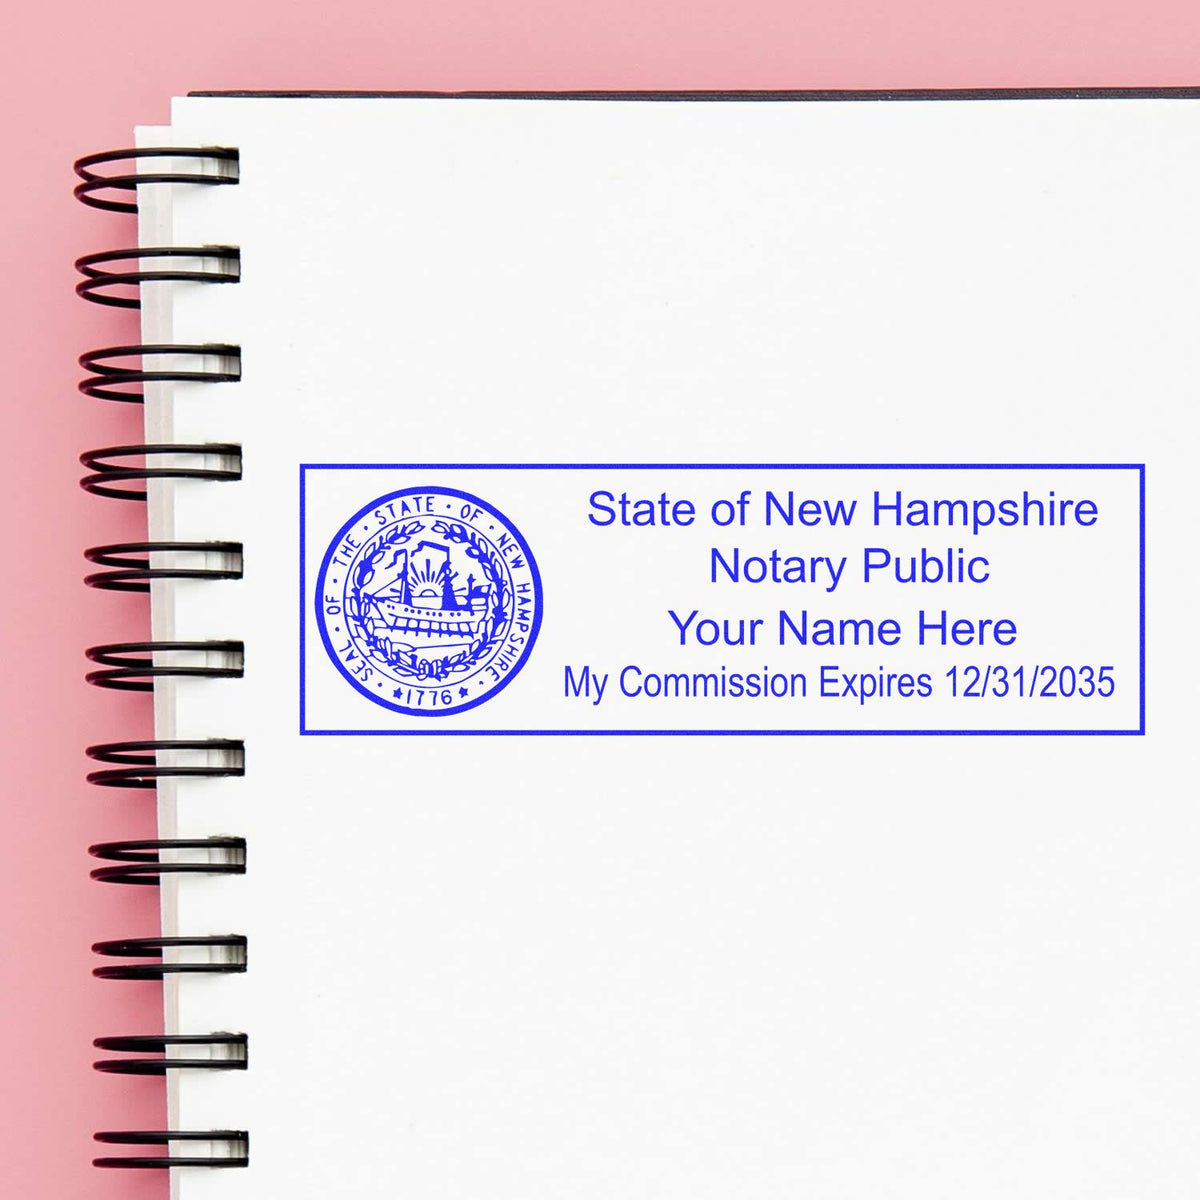 The PSI New Hampshire Notary Stamp stamp impression comes to life with a crisp, detailed photo on paper - showcasing true professional quality.